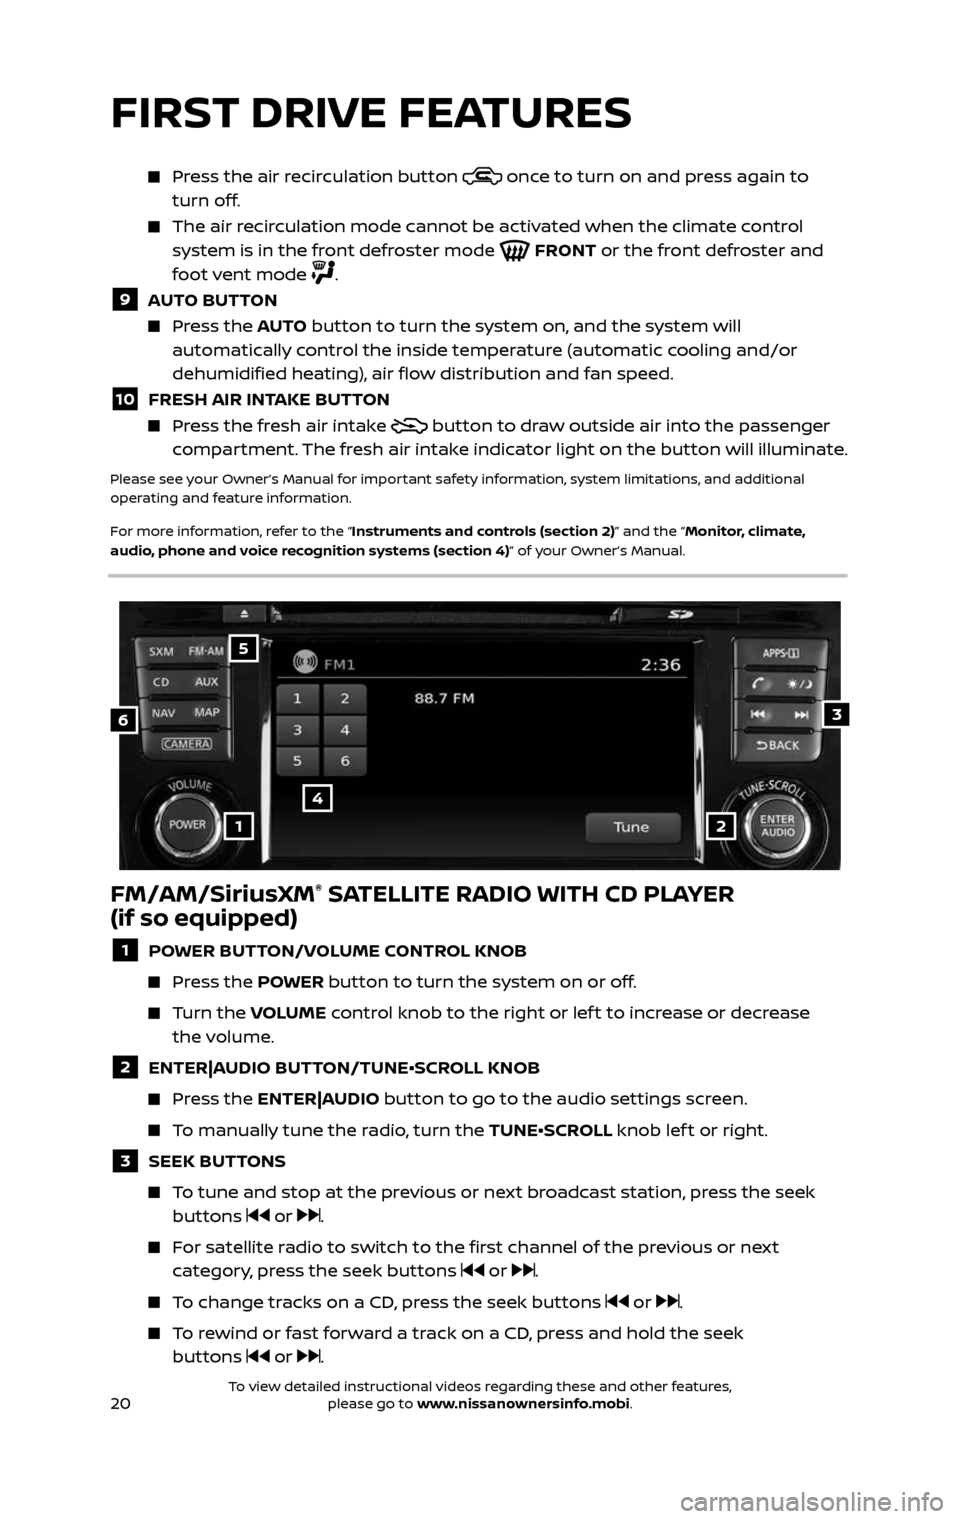 NISSAN ROGUE HYBRID 2017 2.G Quick Reference Guide 20
     Press the air recirculation button  once to turn on and press again to 
turn off.
     The air recirculation mode cannot be activated when the climate control system is in the front defroster 